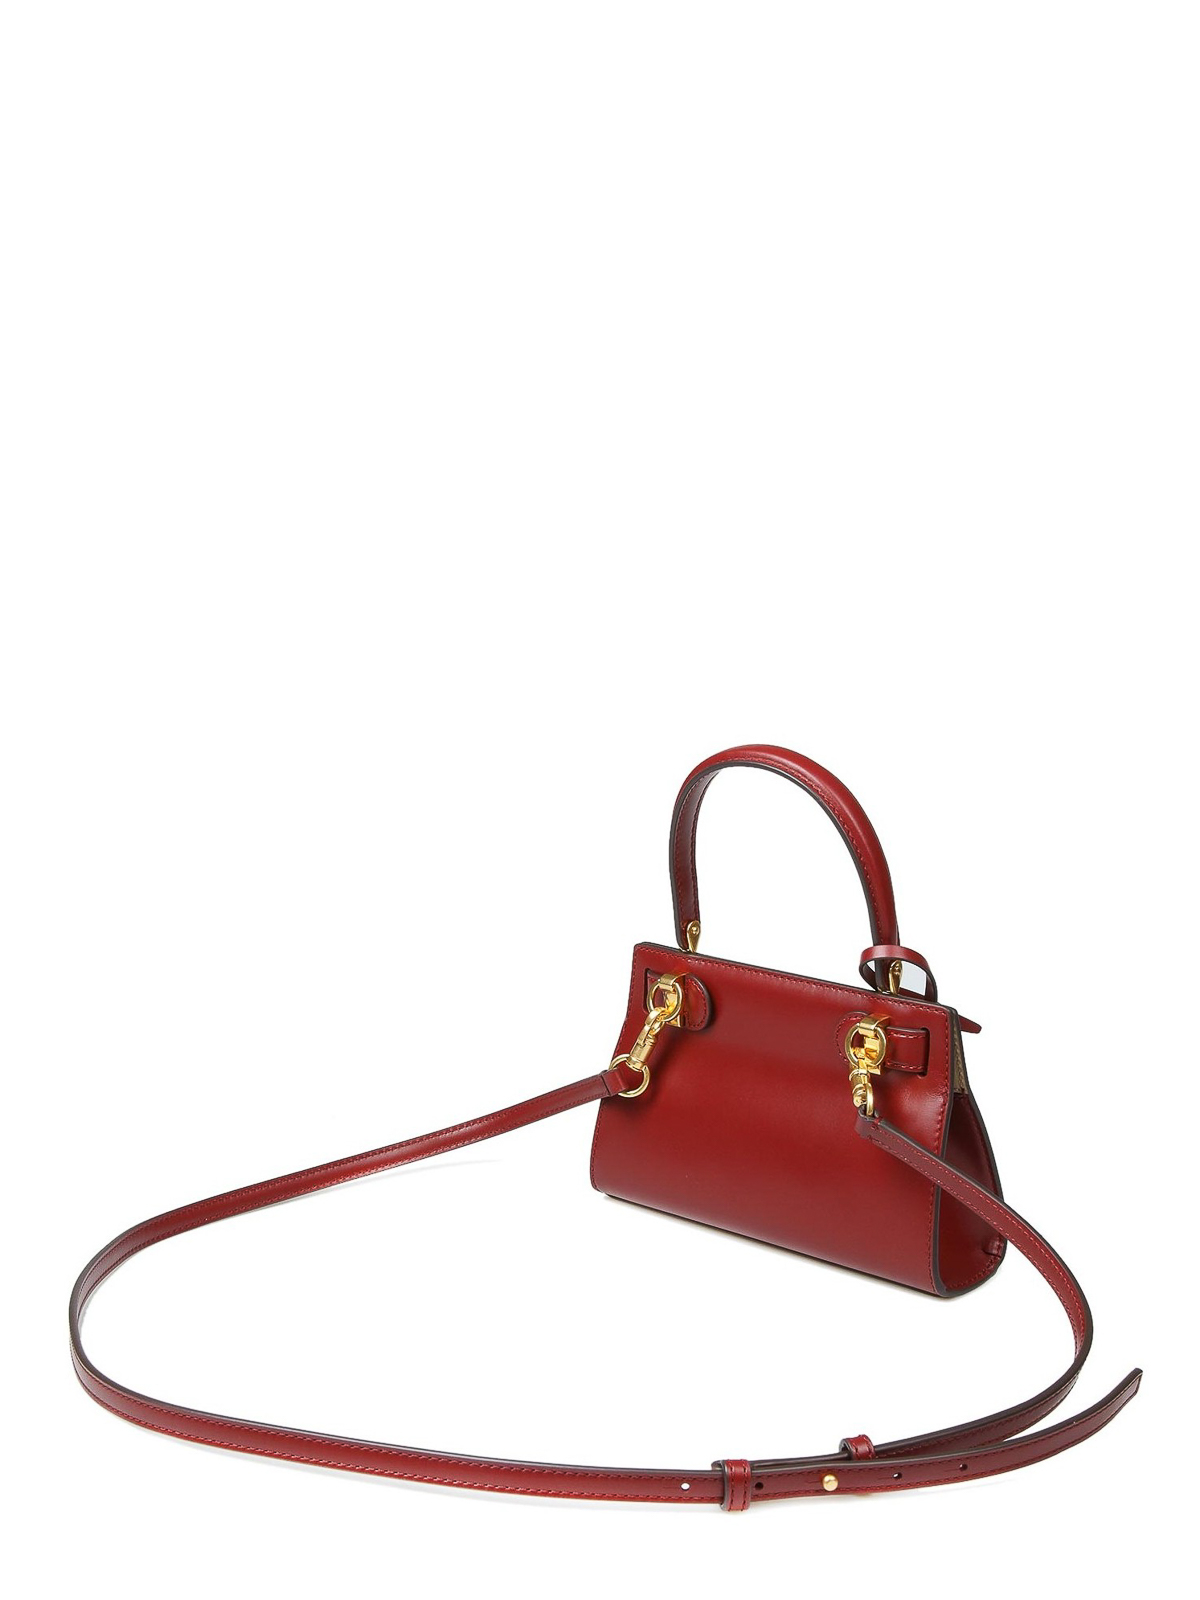 Shoulder bags Tory Burch - Lee Radziwill small smooth leather bag